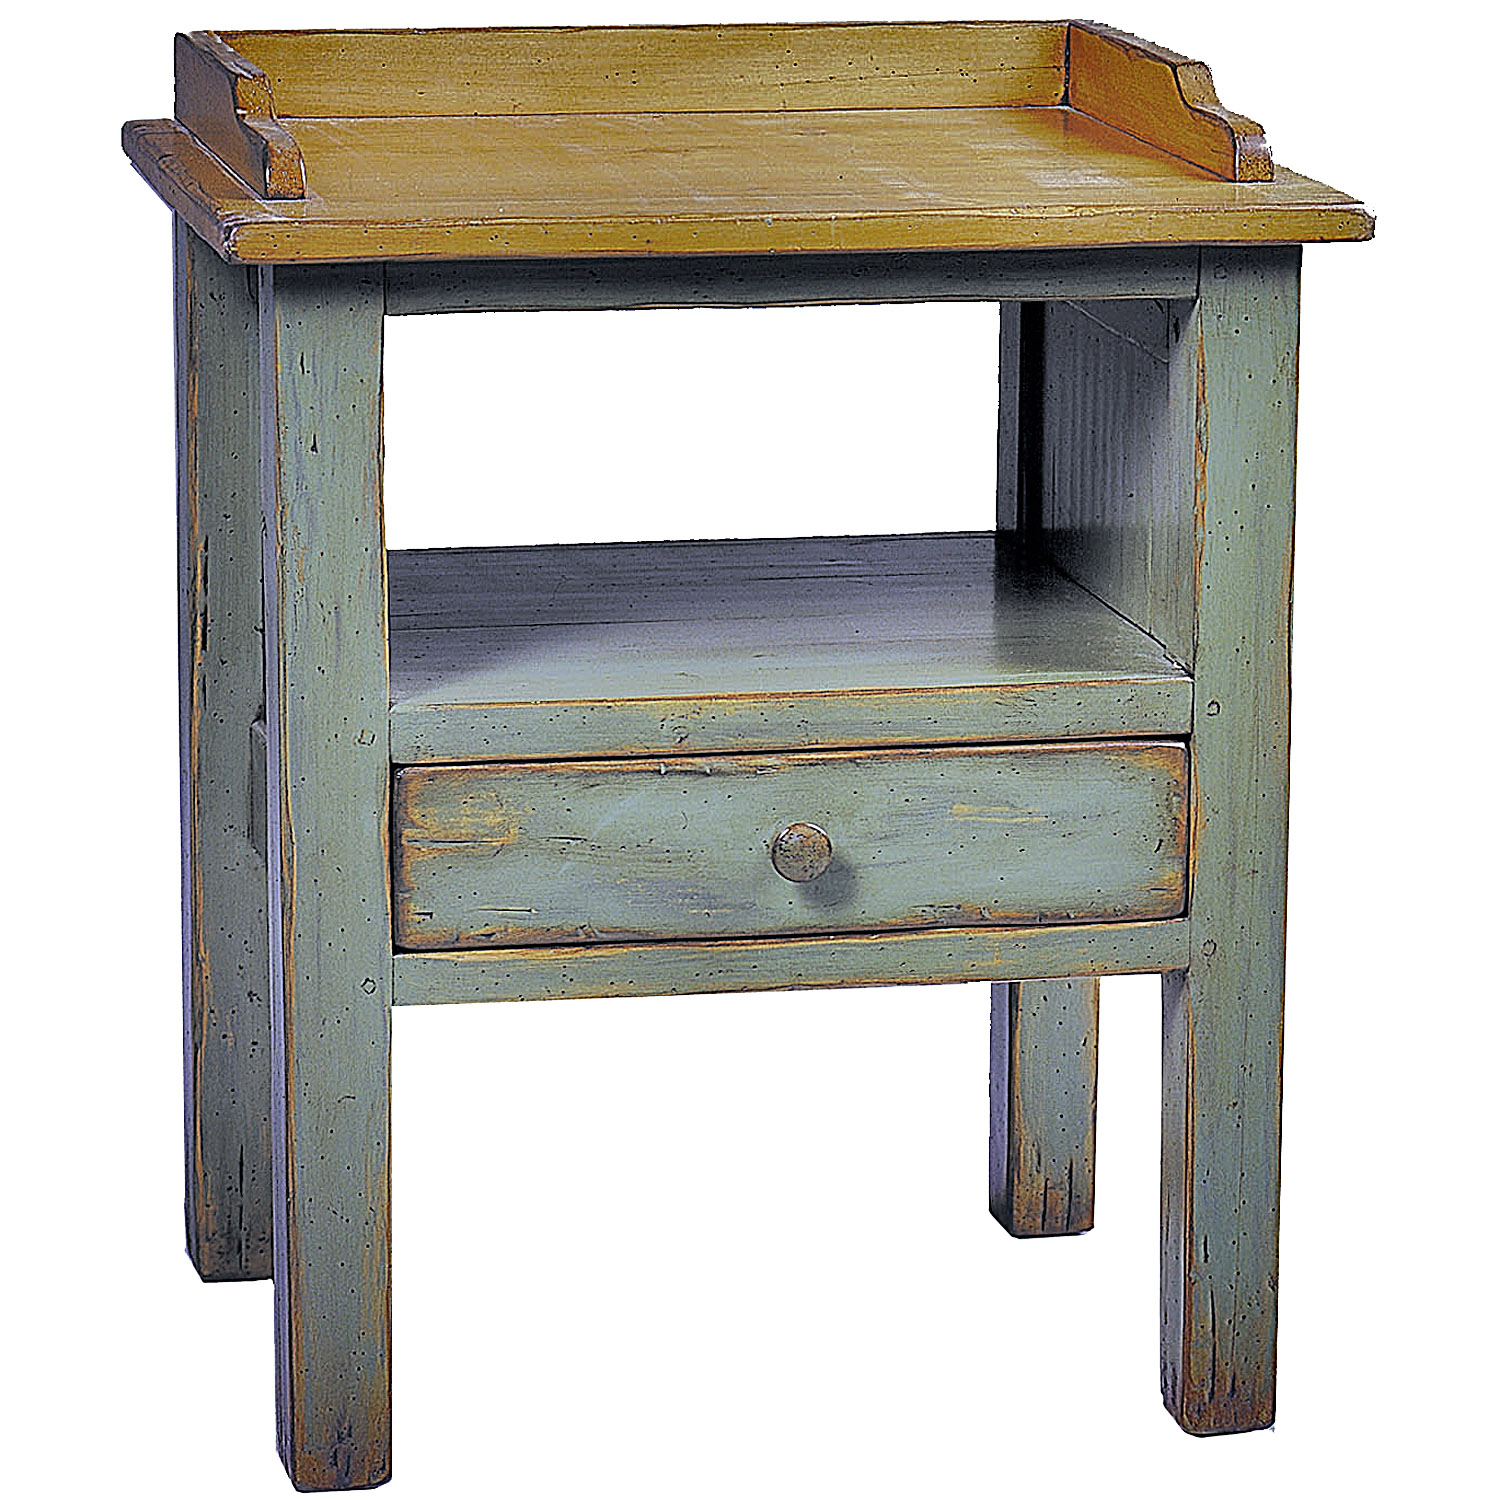 Simmons traditional country side or end table with open shelf and single drawer by Woodland furniture in Idaho Falls